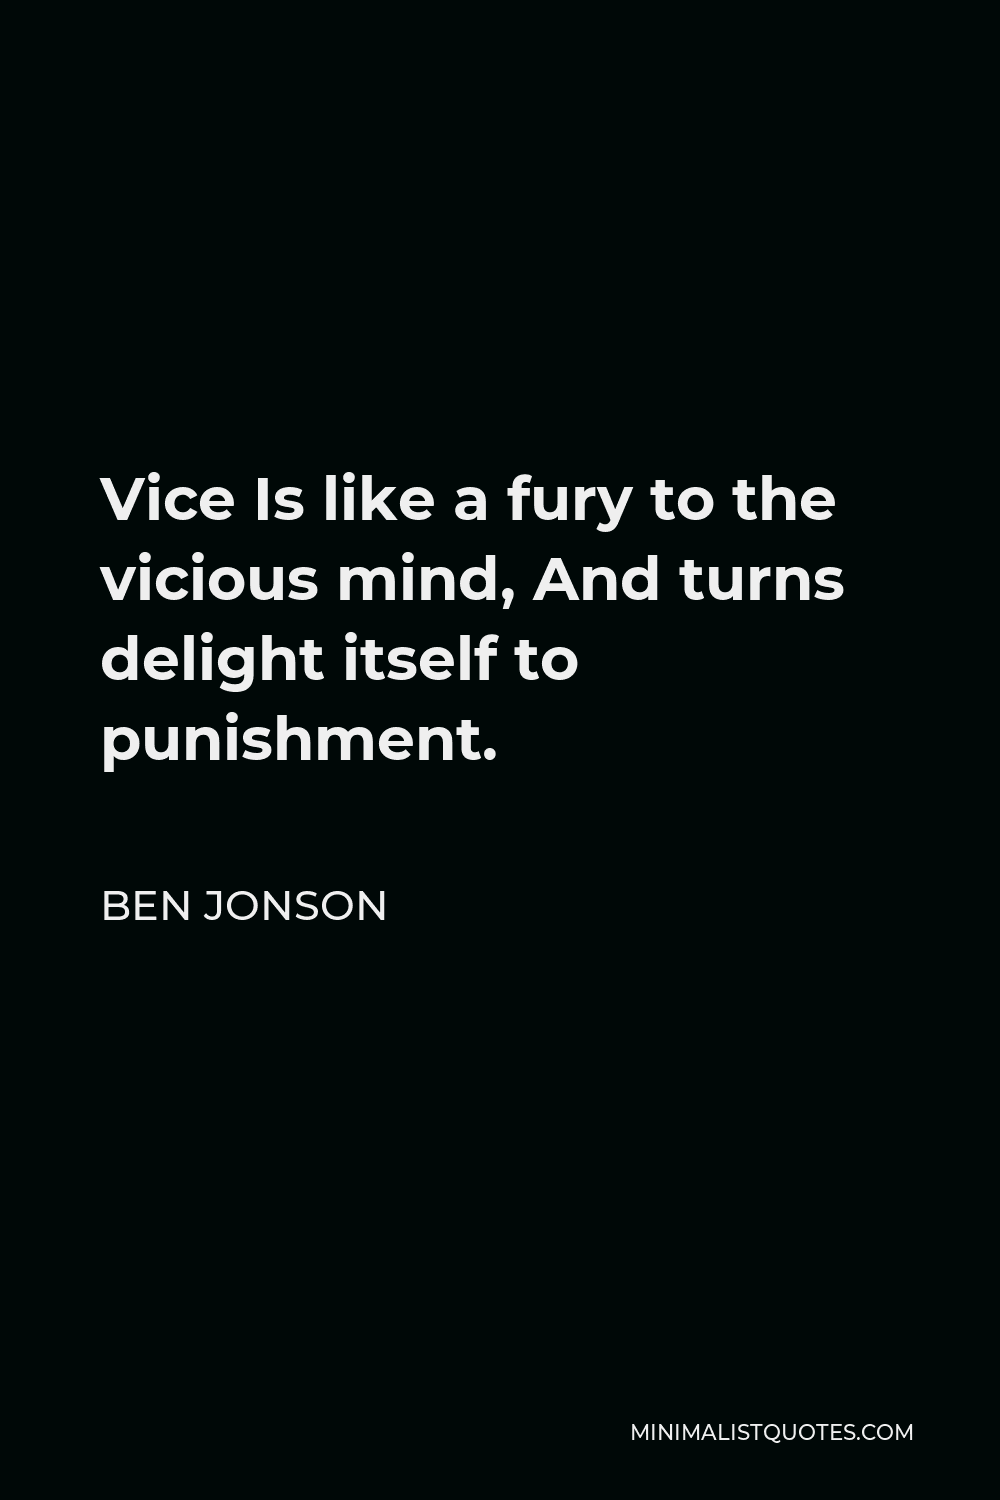 Ben Jonson Quote - Vice Is like a fury to the vicious mind, And turns delight itself to punishment.